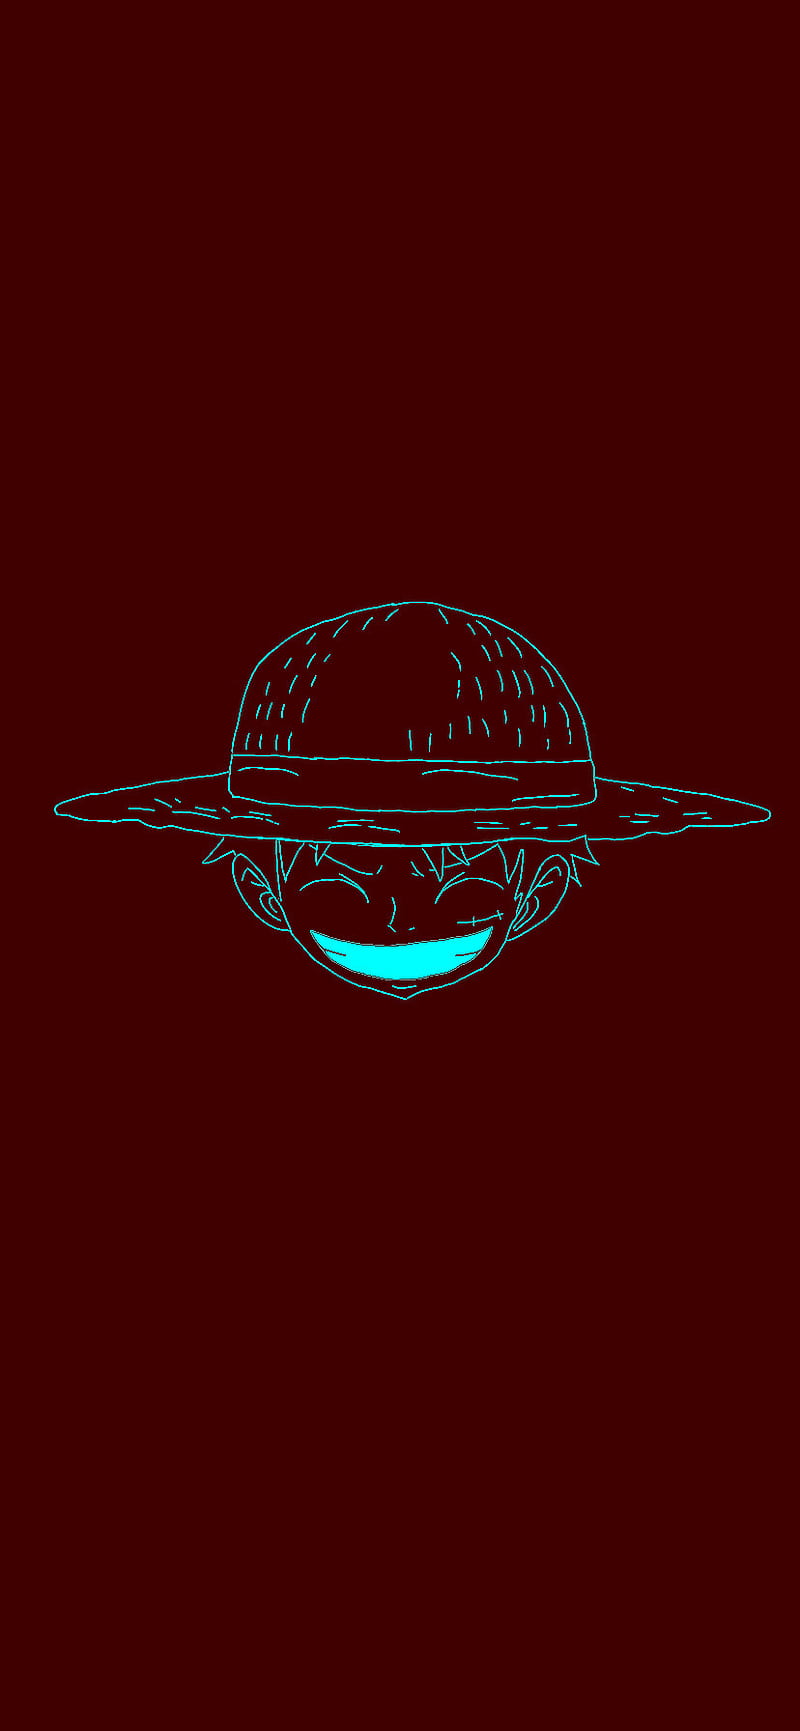 Luffys Head v3, anime, luffy, monkey d luffy, one piece, pirates, strawhat, strawhat pirates, HD phone wallpaper